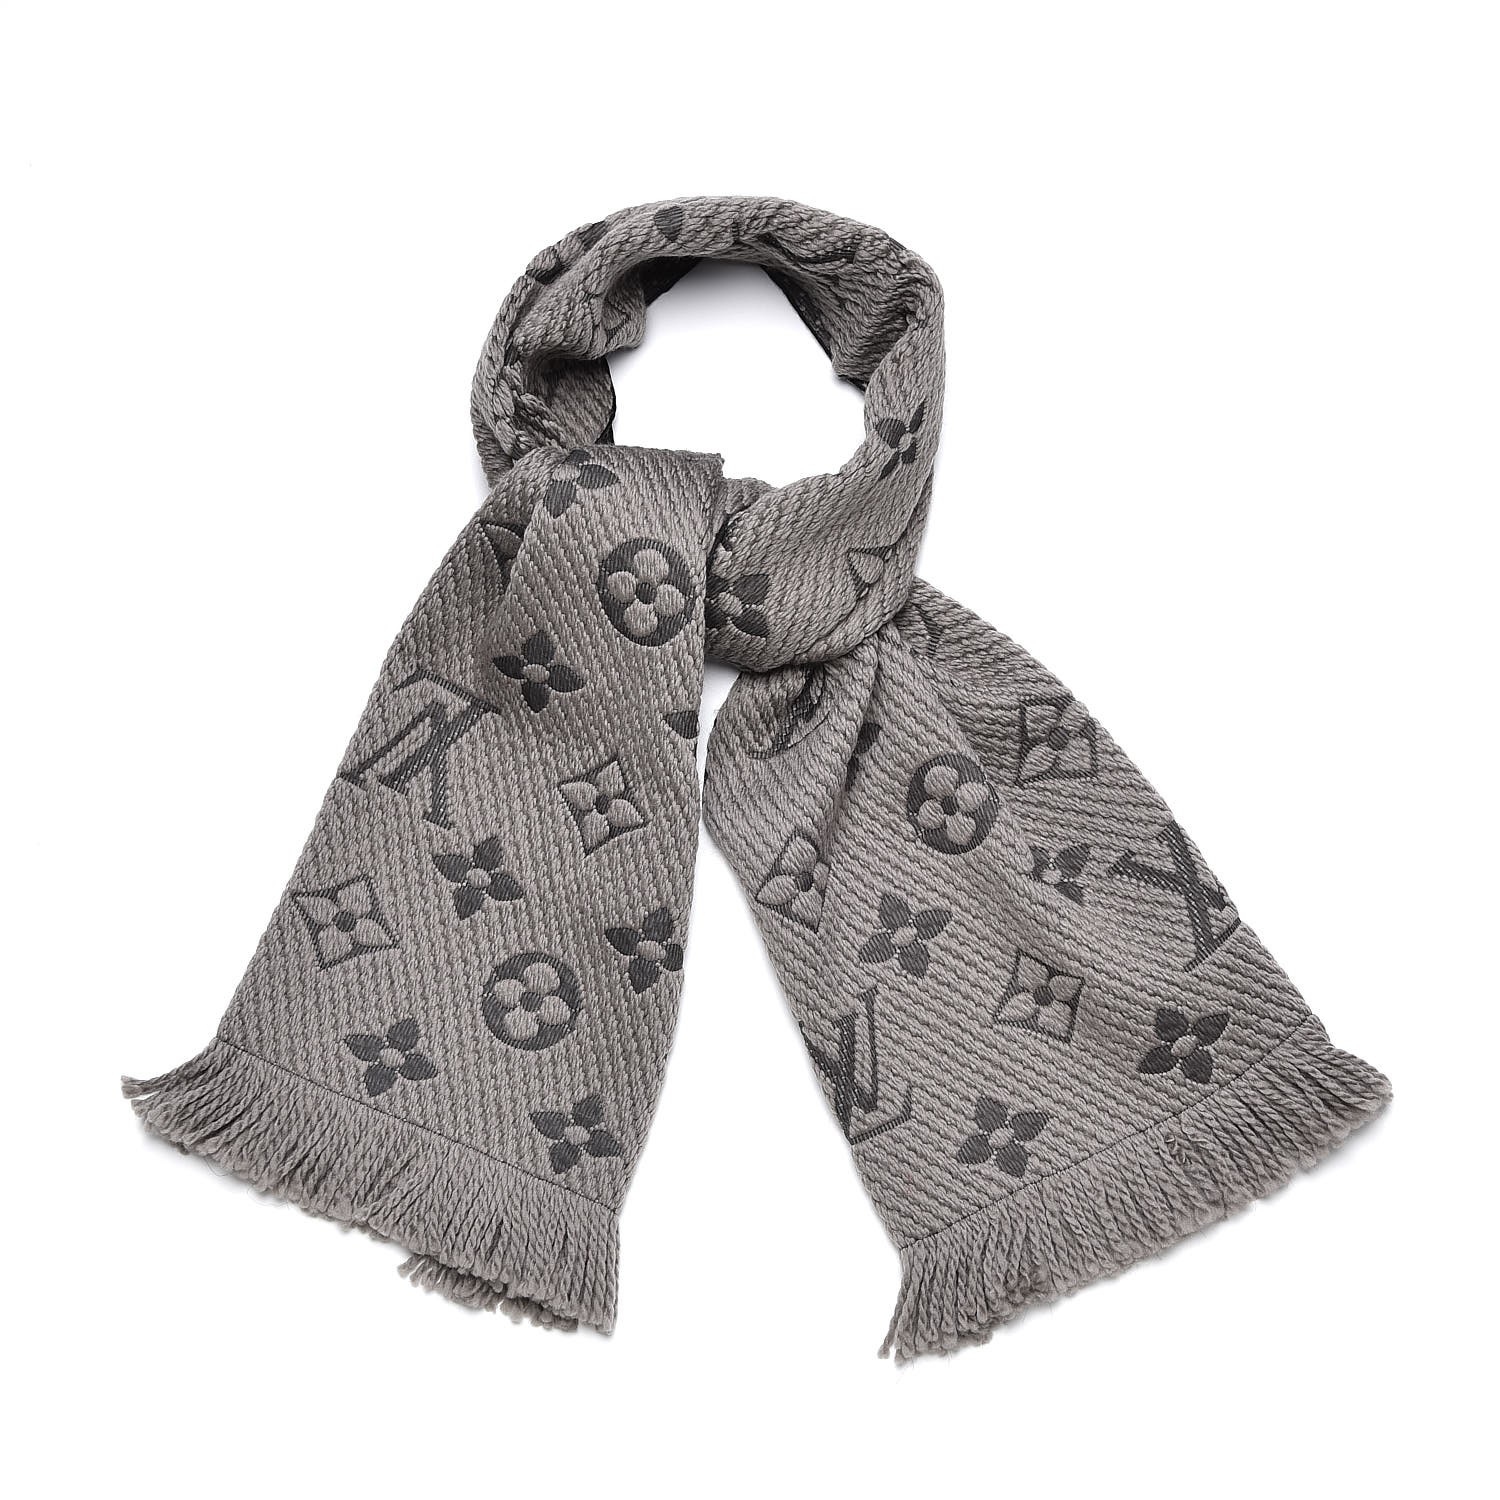 Louis Vuitton - Authenticated Scarf - Black for Men, Never Worn